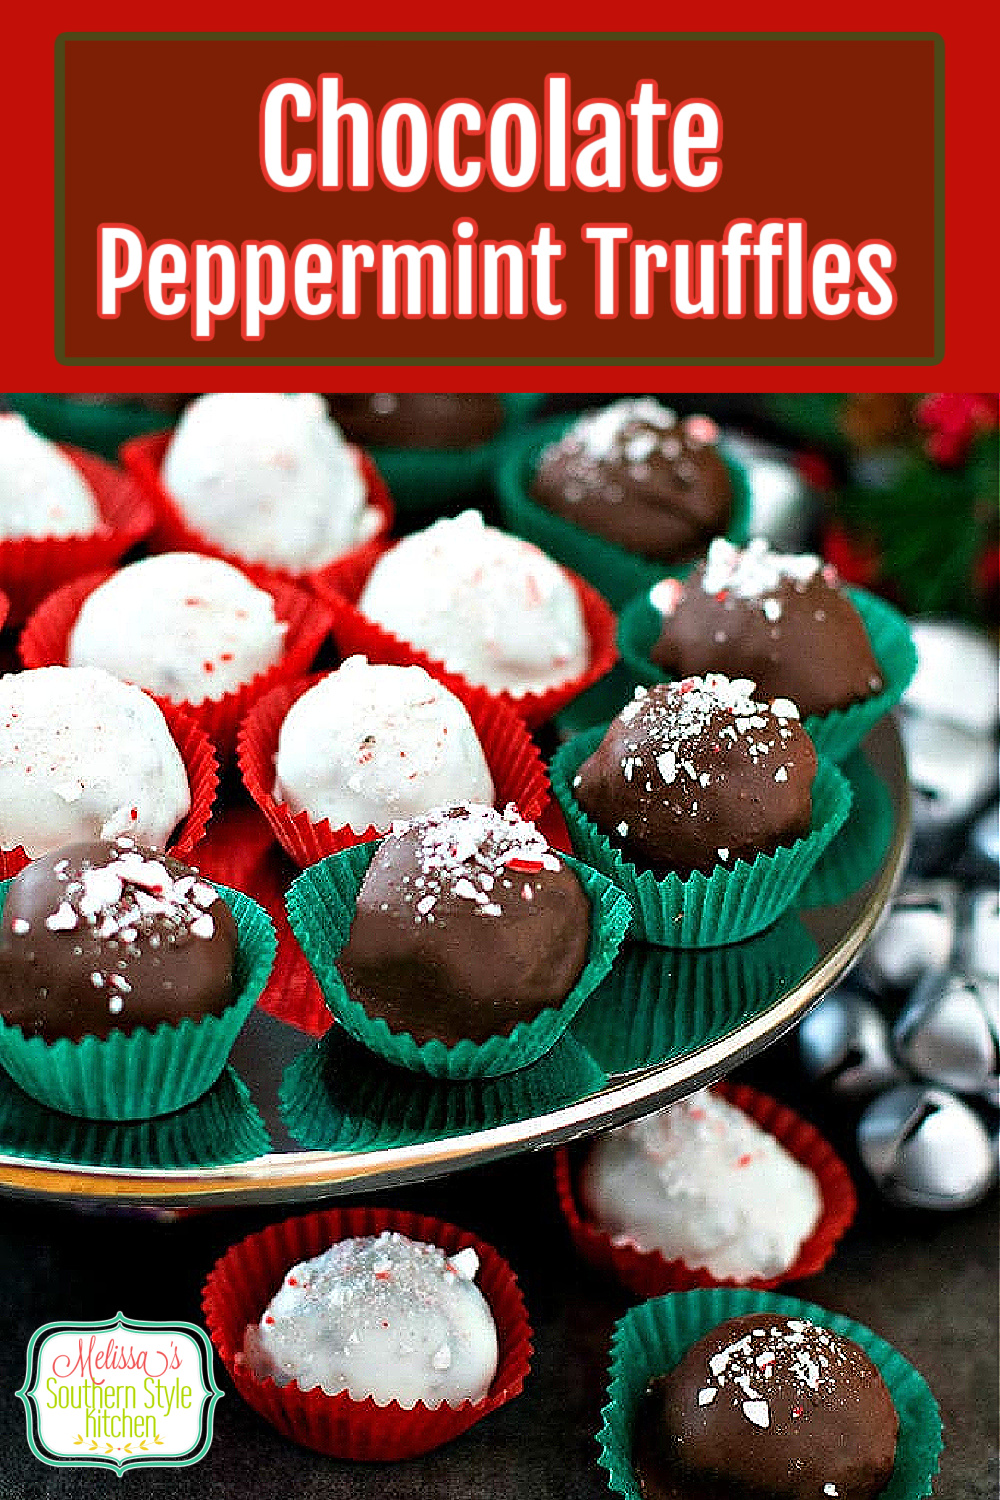 These easy two-bite Chocolate Peppermint Truffles require no cooking at all #oreotruffles #pepperminttruffles #chocolatepepperminttruffles #easydessertrecipes #holidayrecipes #desserts #holidaydesserts #christmascandy #dessertfoodreipes #easyrecipes #chocolate #southernrecipes #southernfood #melissassouthernstylekitchen #peppermintdesserts